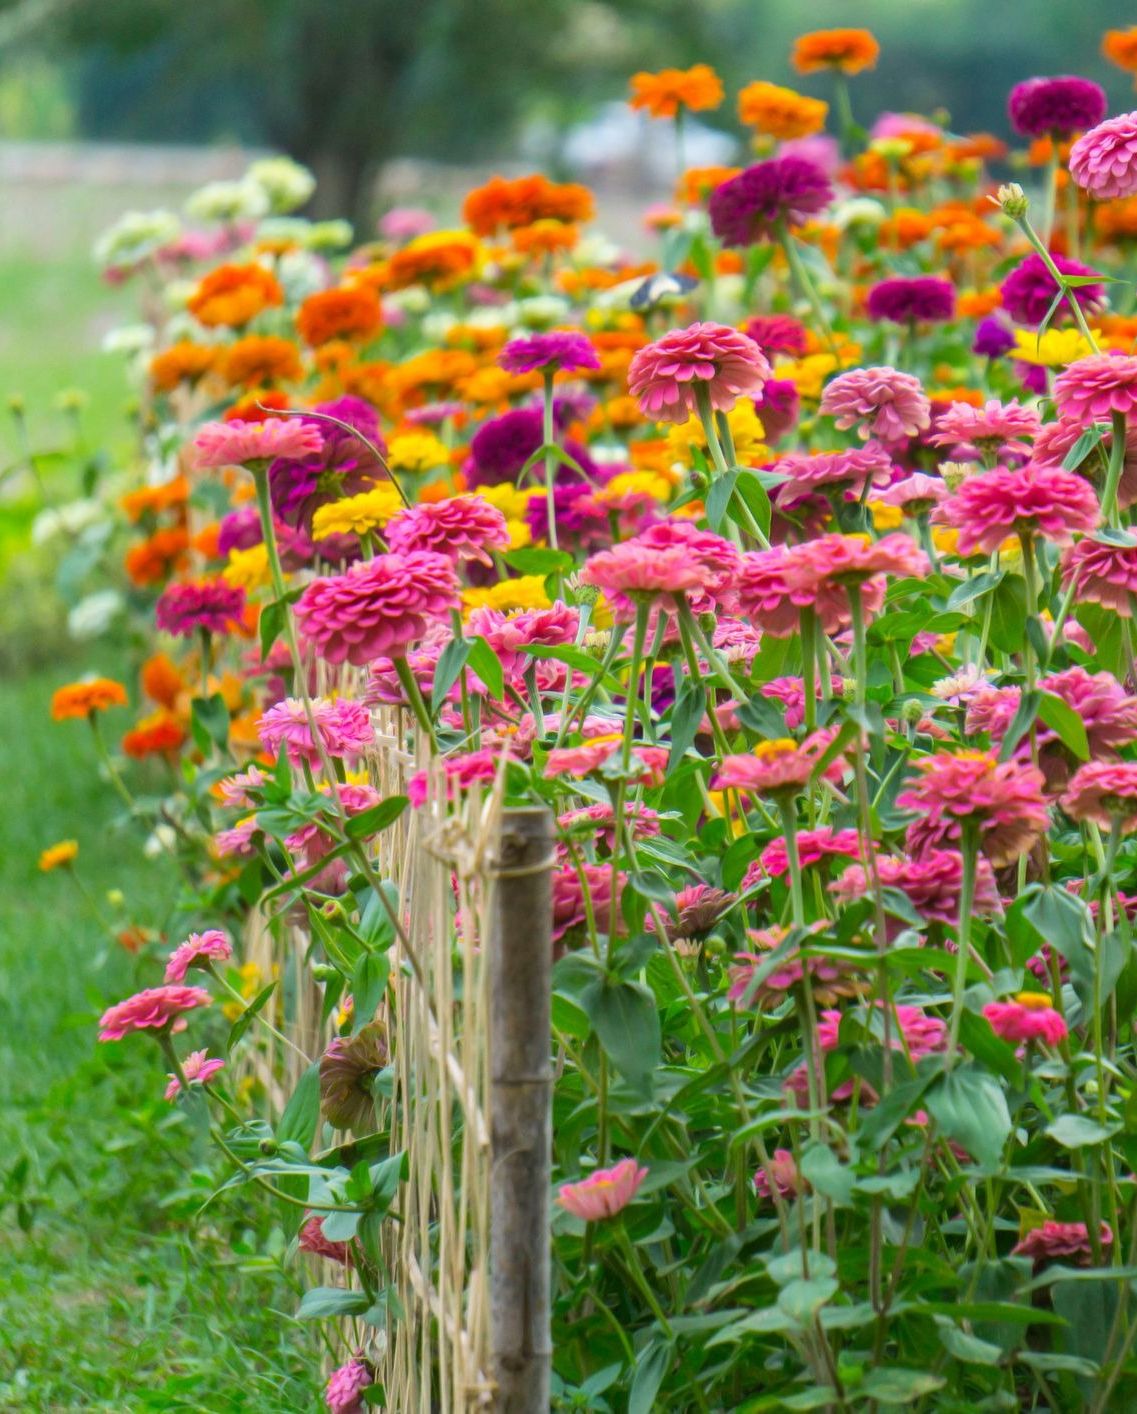 pink, red, orange, yellow and violet zinnias, an annual plant, blooming in an open country garden behind a short wood fence